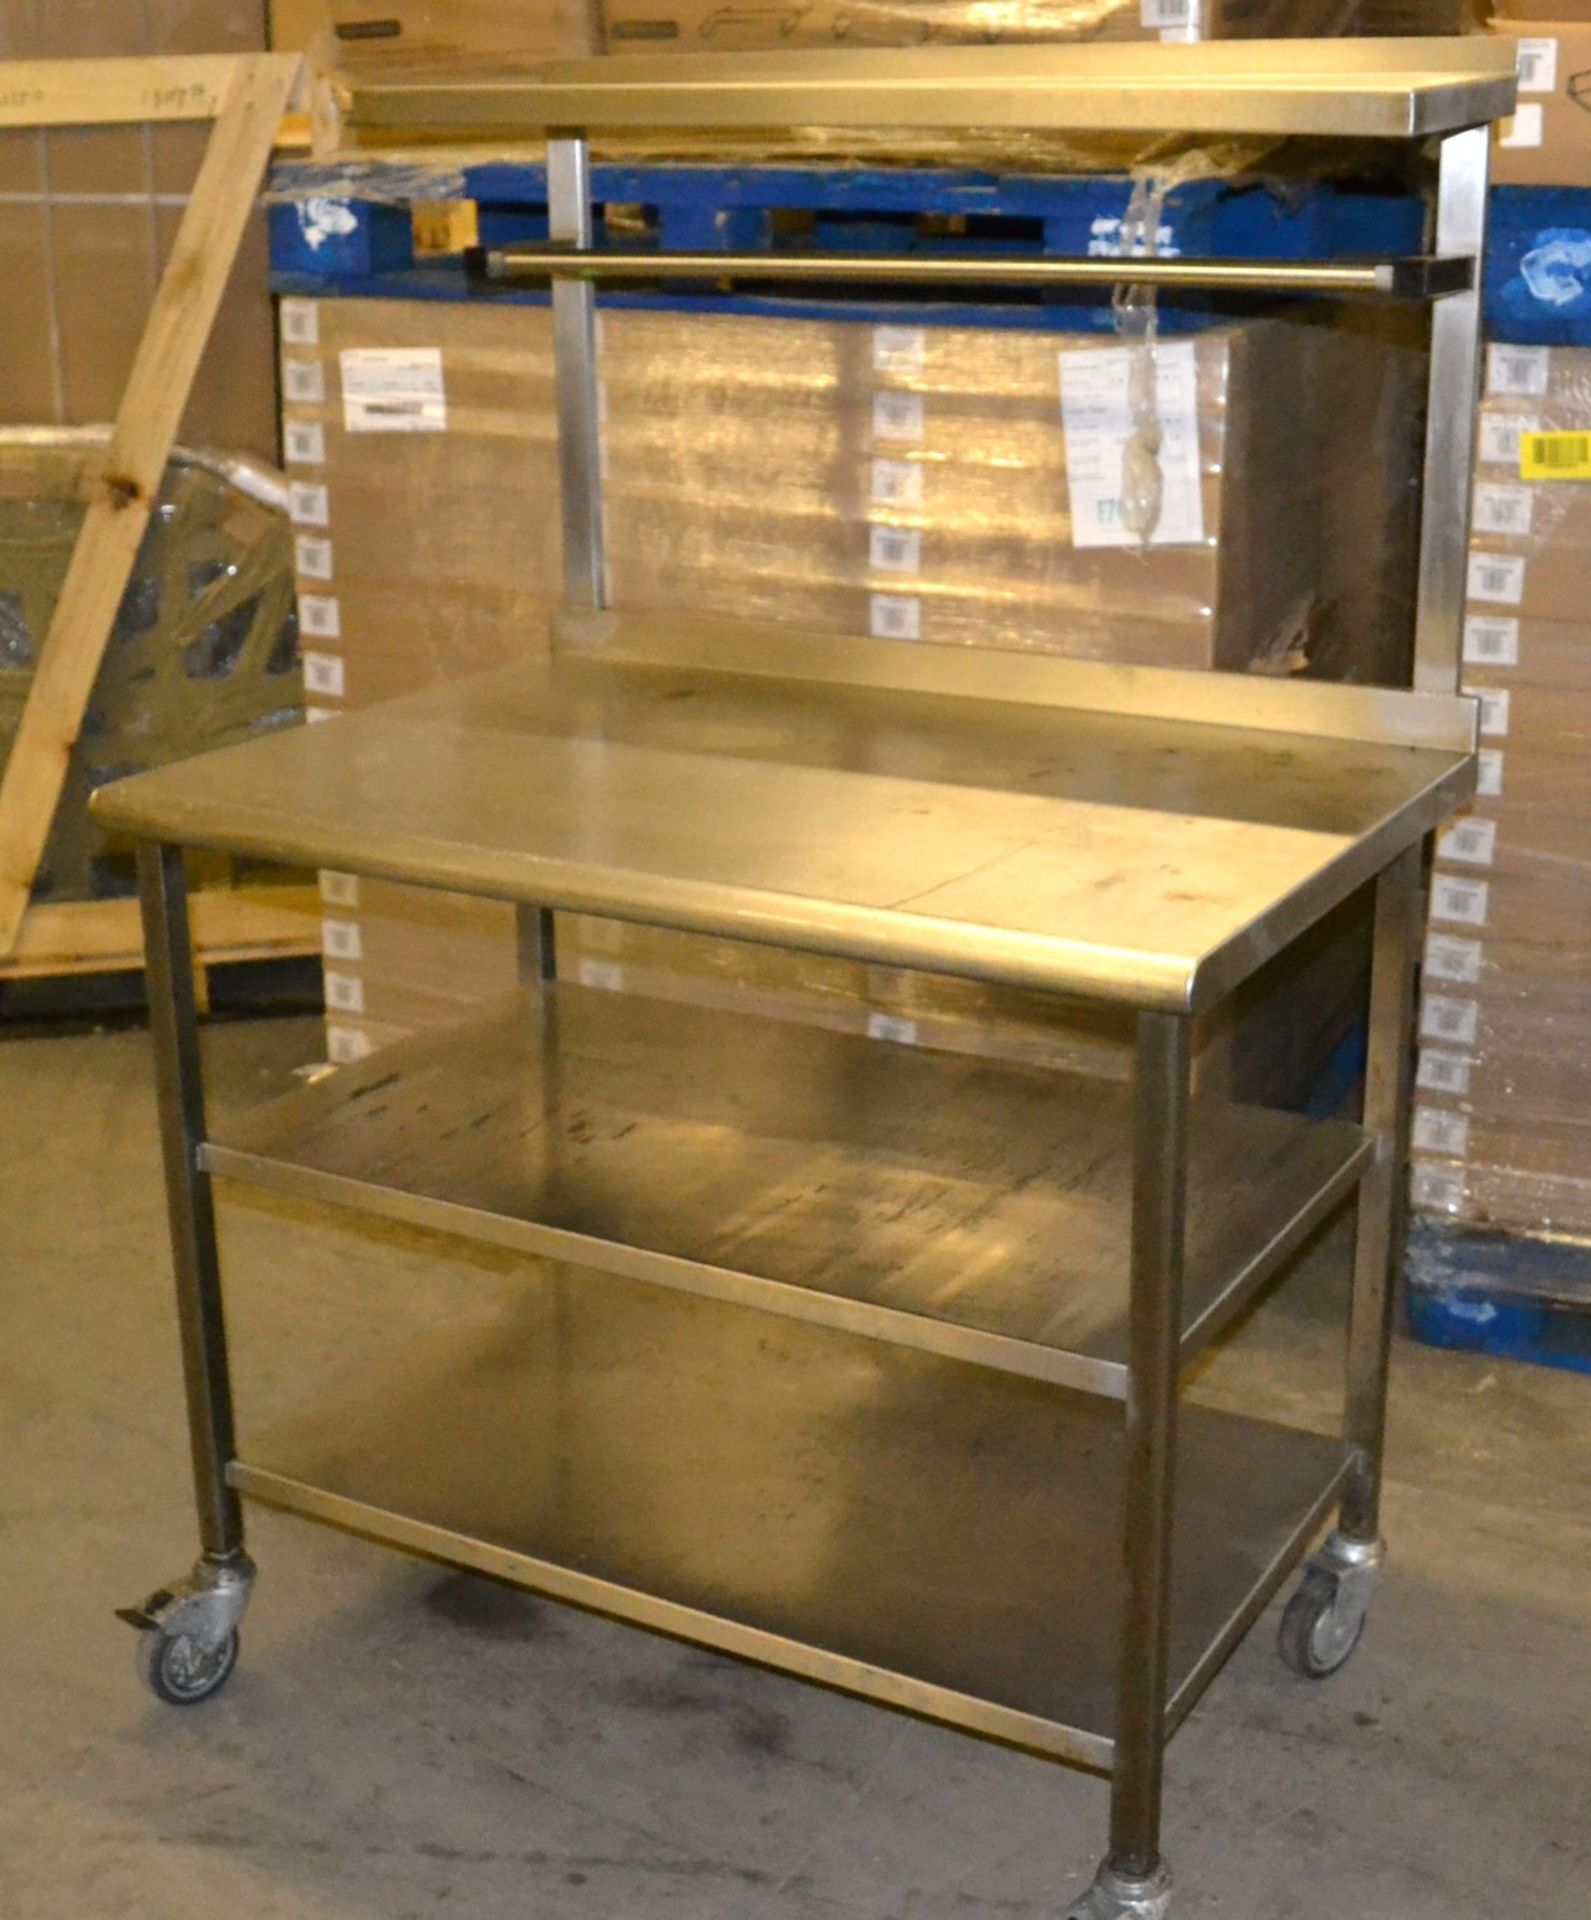 1 x Wheeled Stainless Steel Prep Table - Dimensions: 100 x 69.5 x 148cm - Ref: MC120 - CL282 - Locat - Image 4 of 11